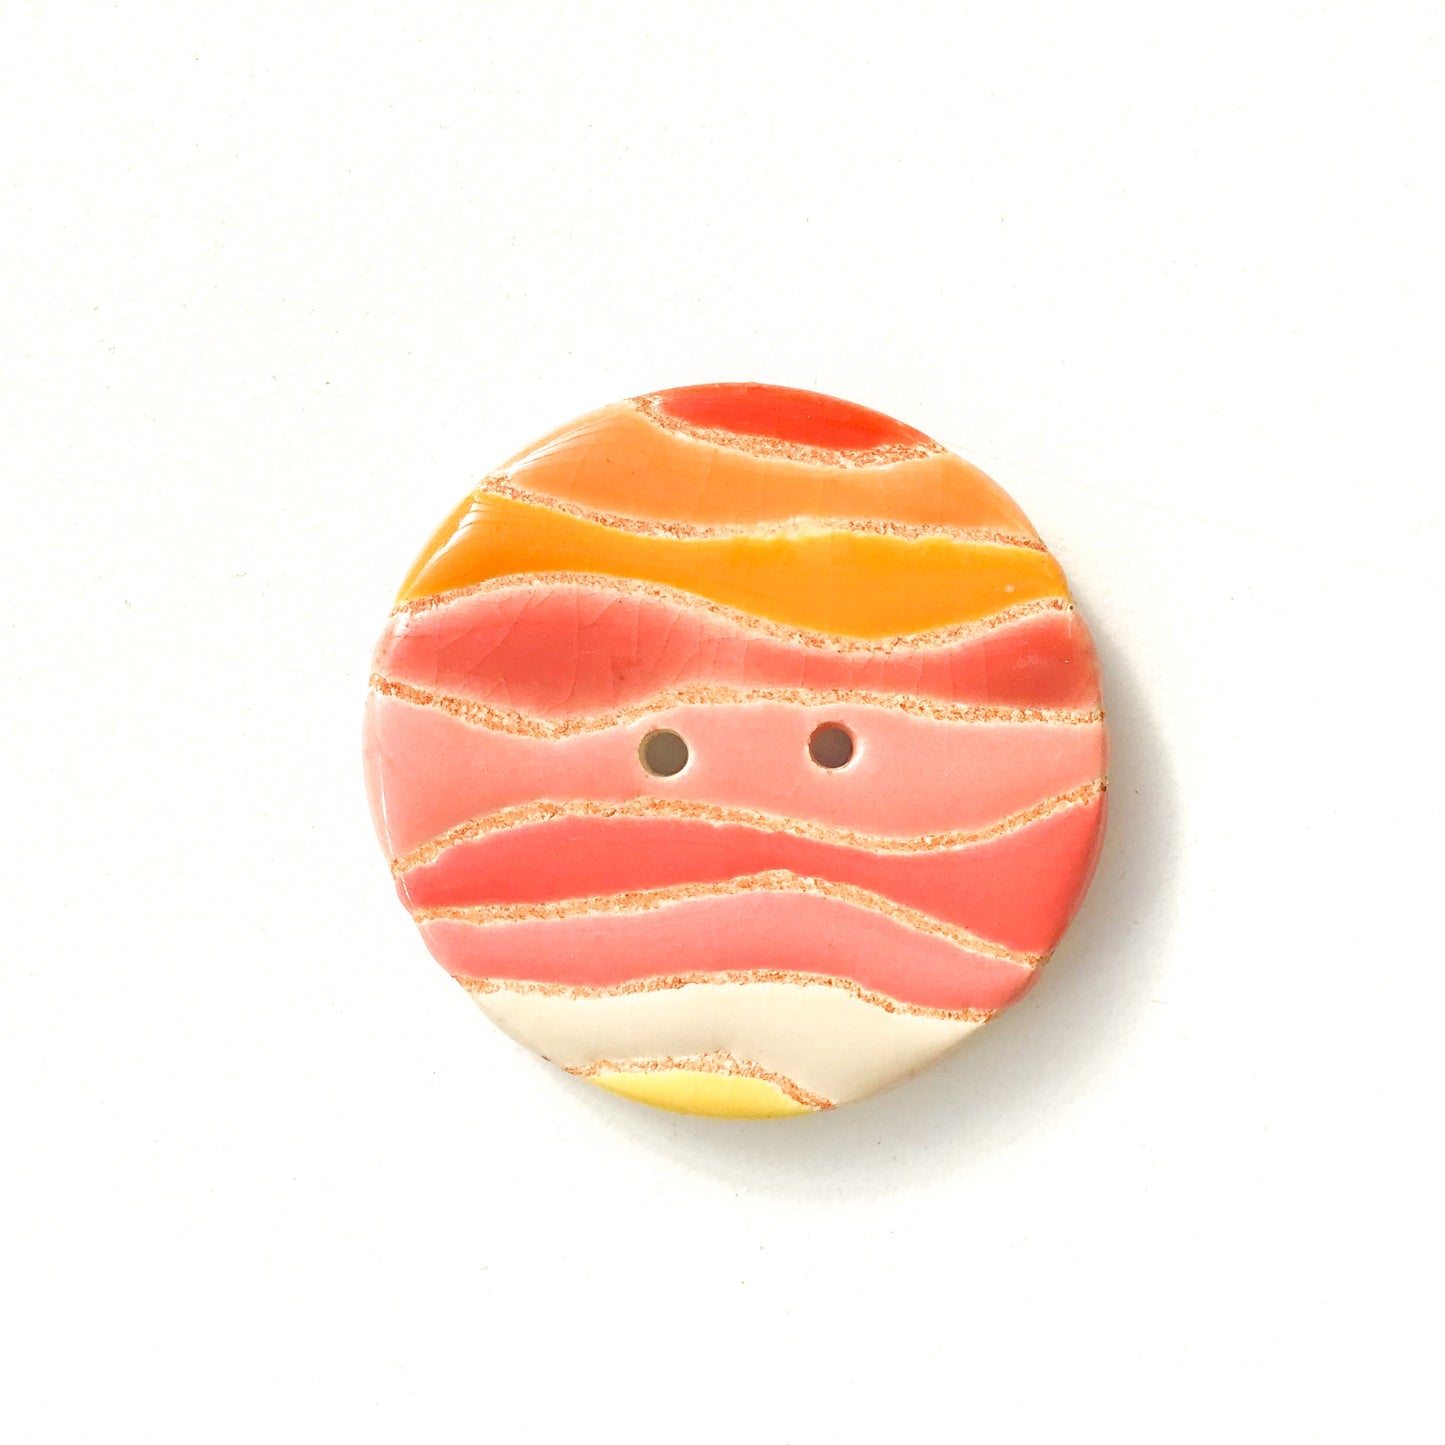 Colorful 'Waves' Quilted Buttons - Decorative Ceramic Buttons - 1 3/8"